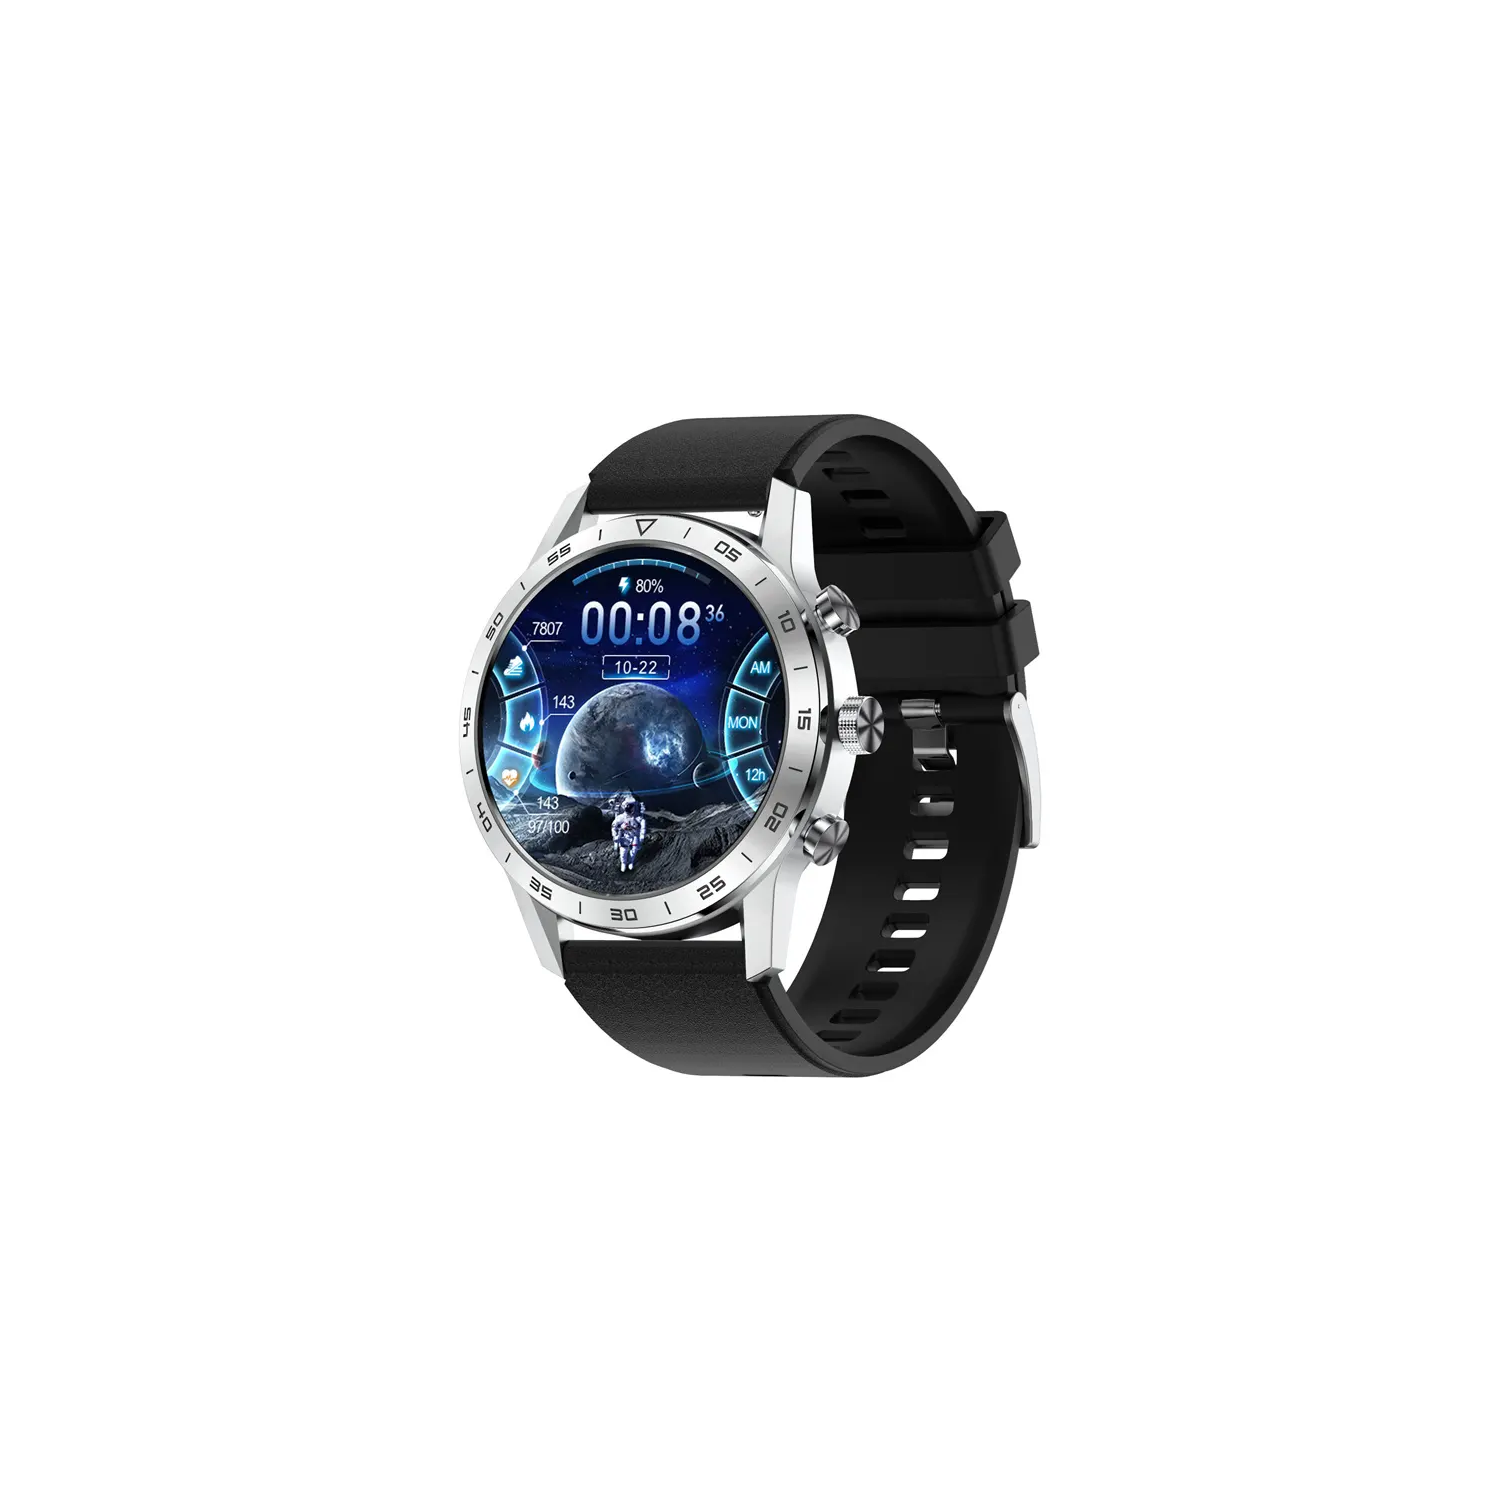 ISPEKTRUM iS70 Smart Watch 1.43" HD AMOELD Screen Bluetooth Calls & Text Waterproof Multiple Sports & Fitness Tracker Heart Rate & BP Monitor works with Android IOS iPhone Samsung